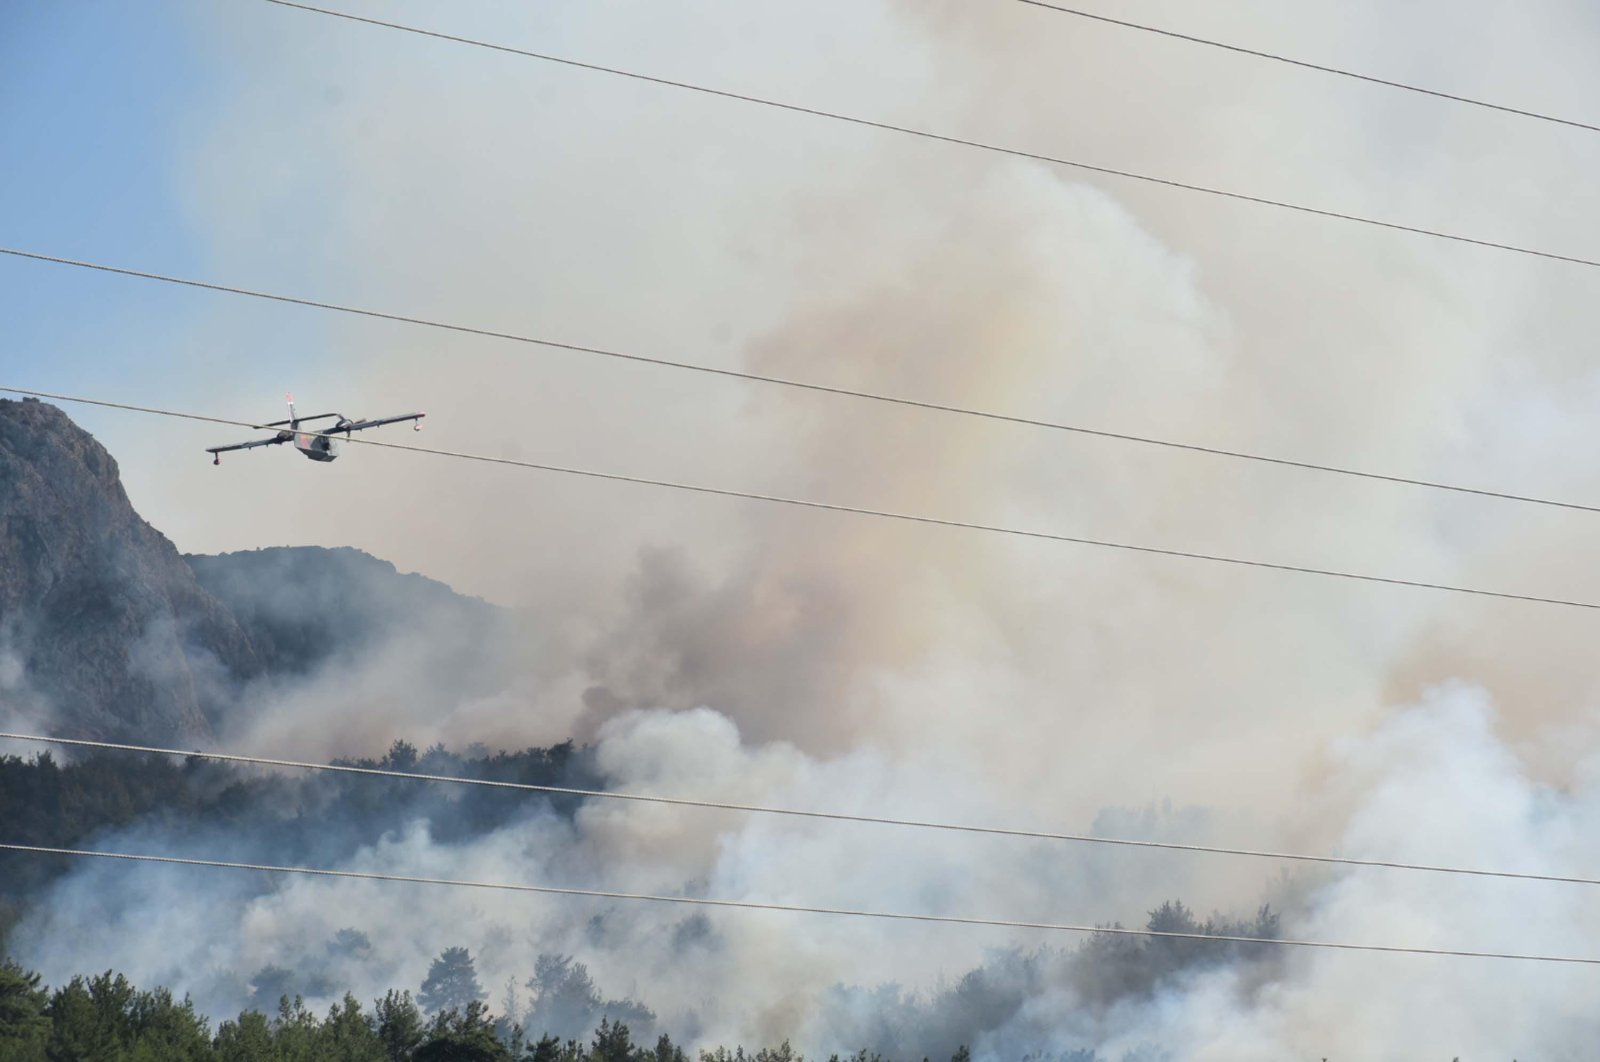 Bodies recovered after firefighter helicopter crashes in Izmir